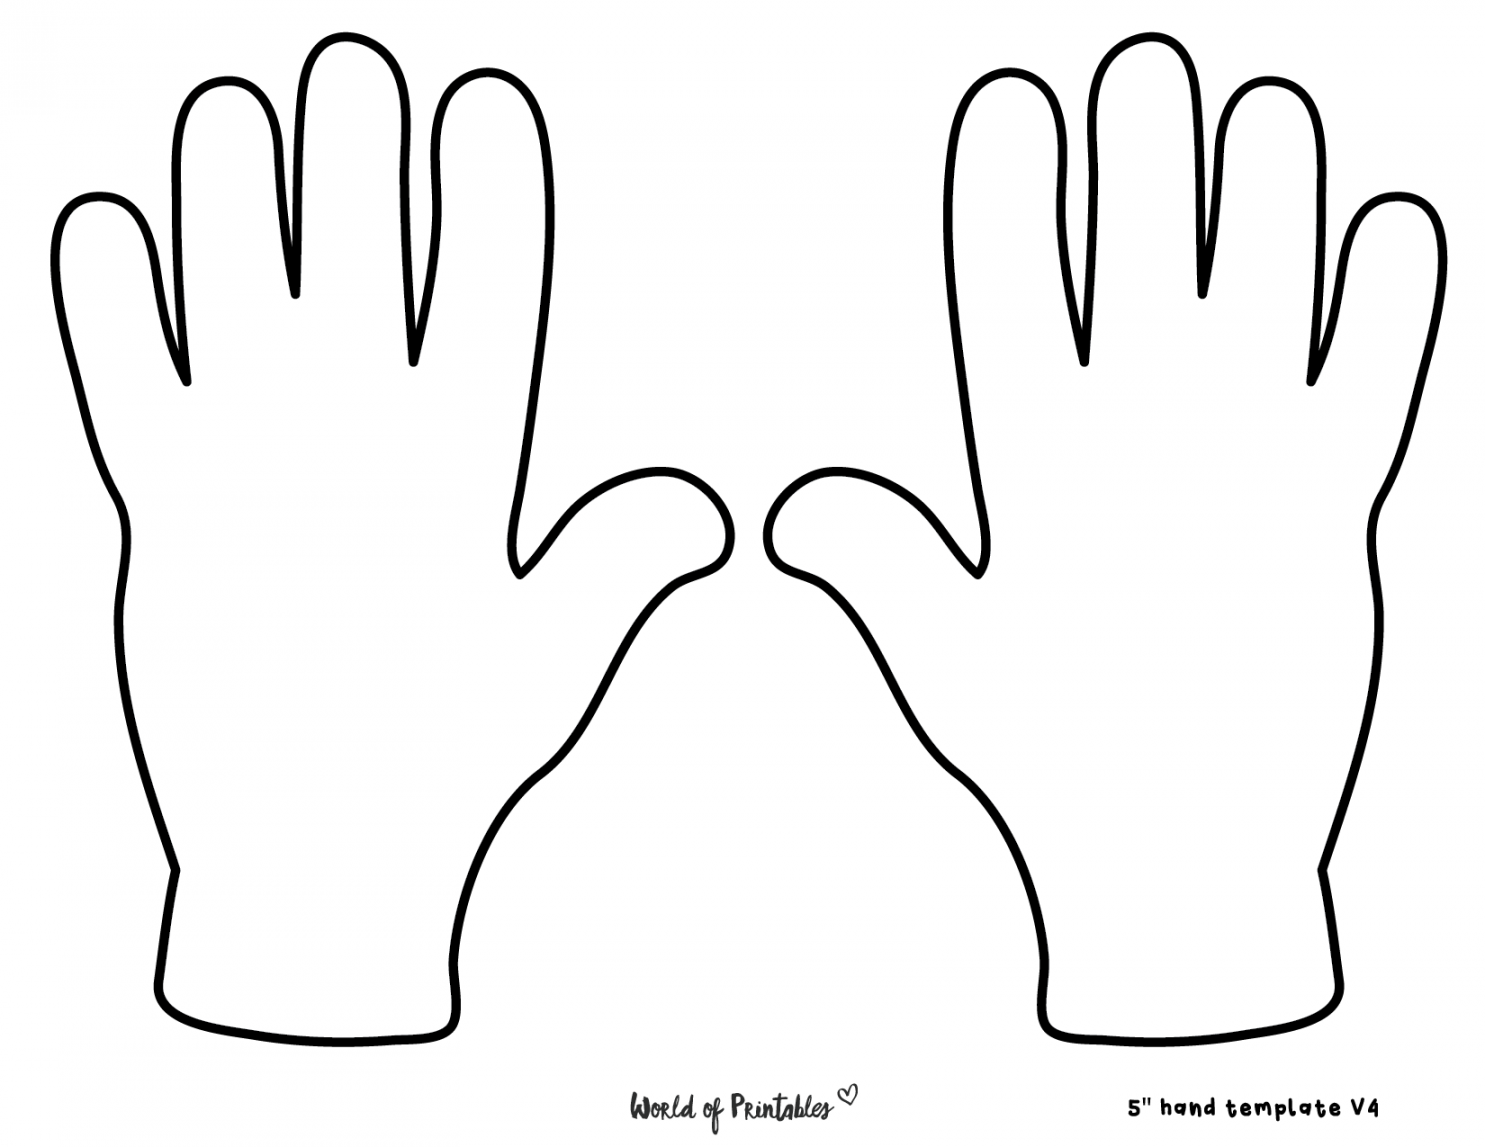 Hand Outline Printable Templates - World of Printables - FREE Printables - Hand Cut Out